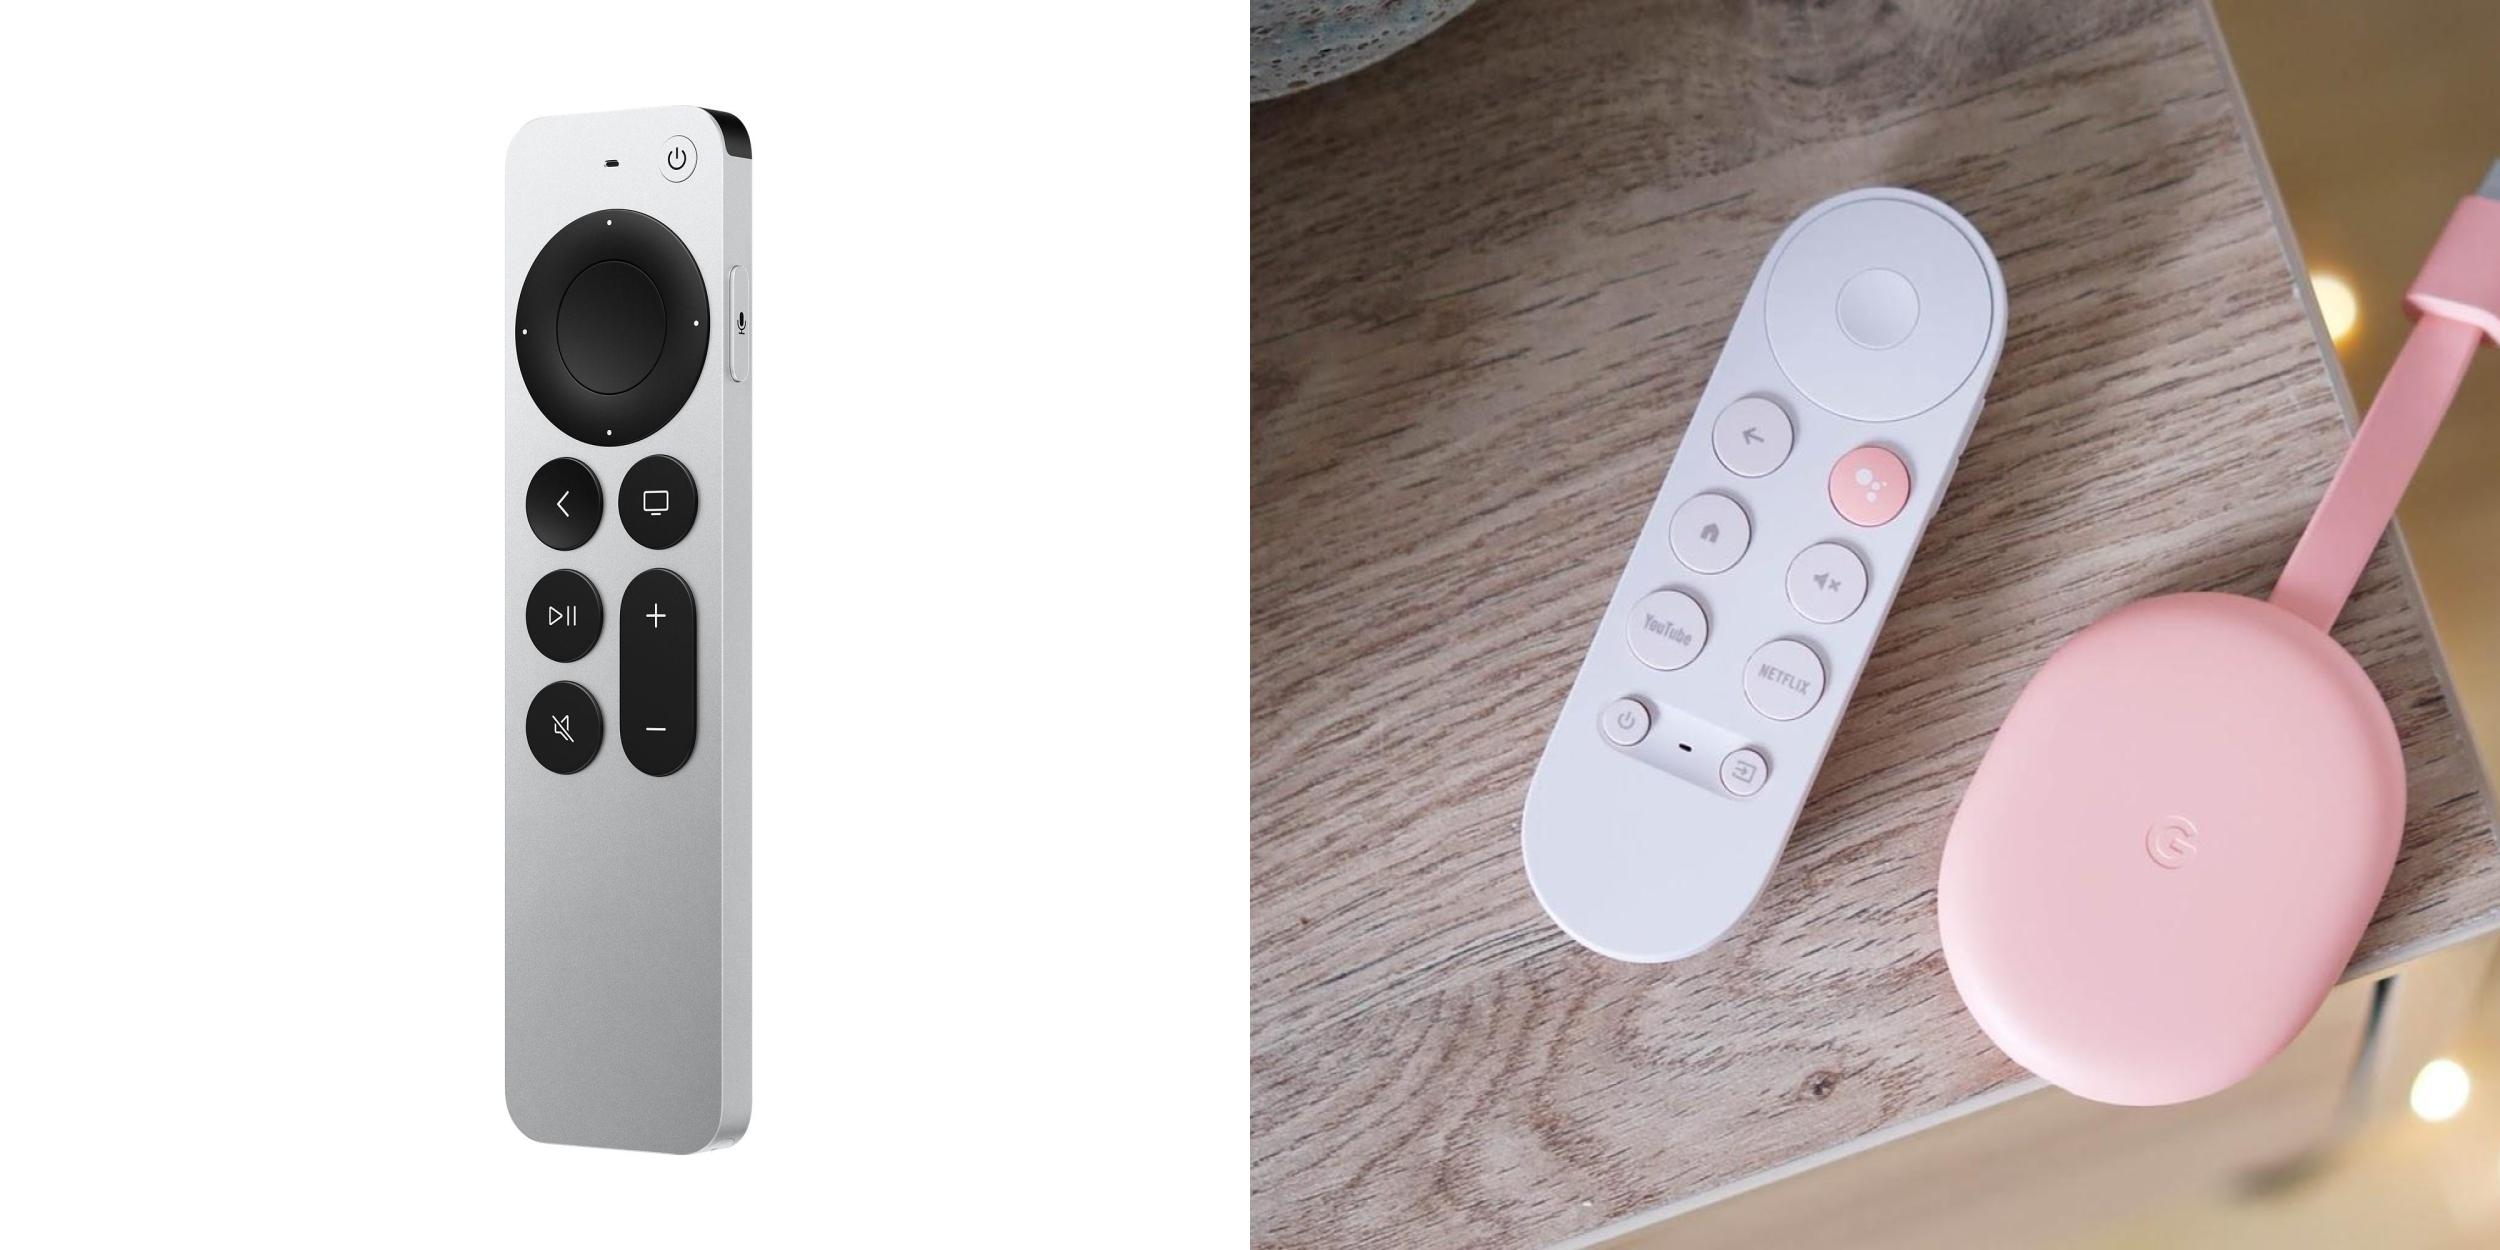 w/ Google TV costs less new Remote - 9to5Google